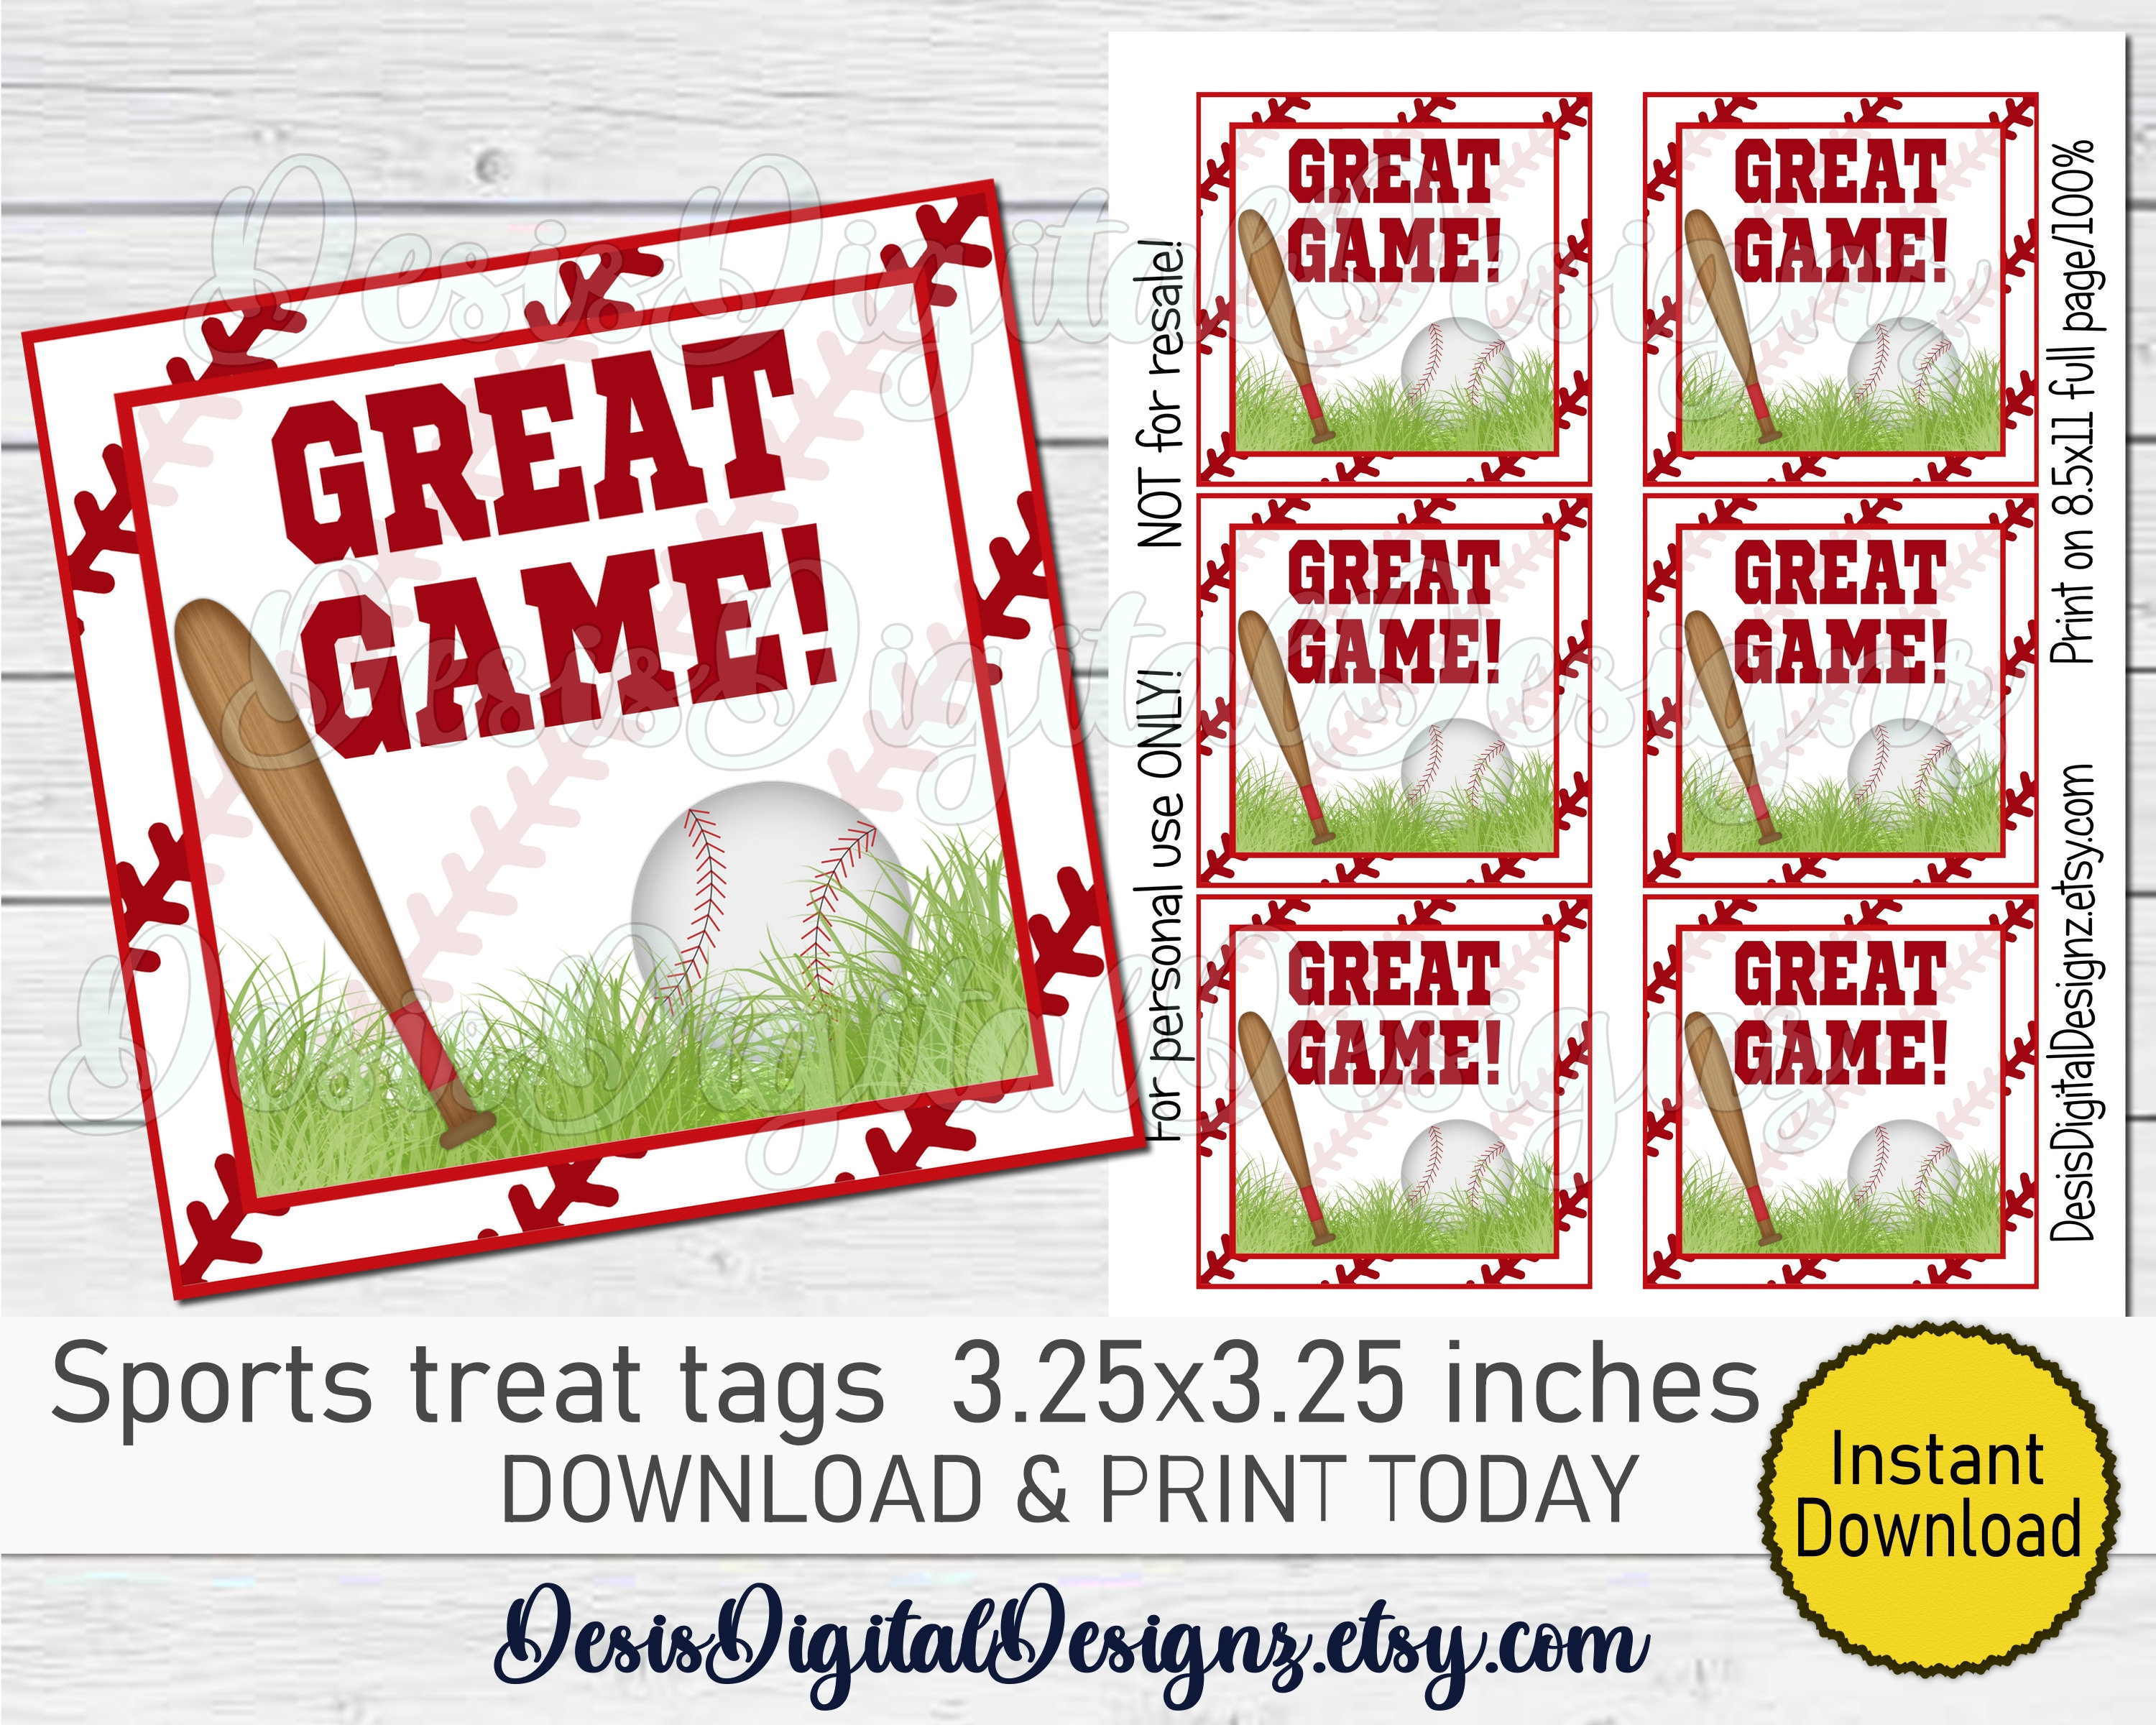 Great Game Treat Tags Baseball Handout Game Day Favors Mini